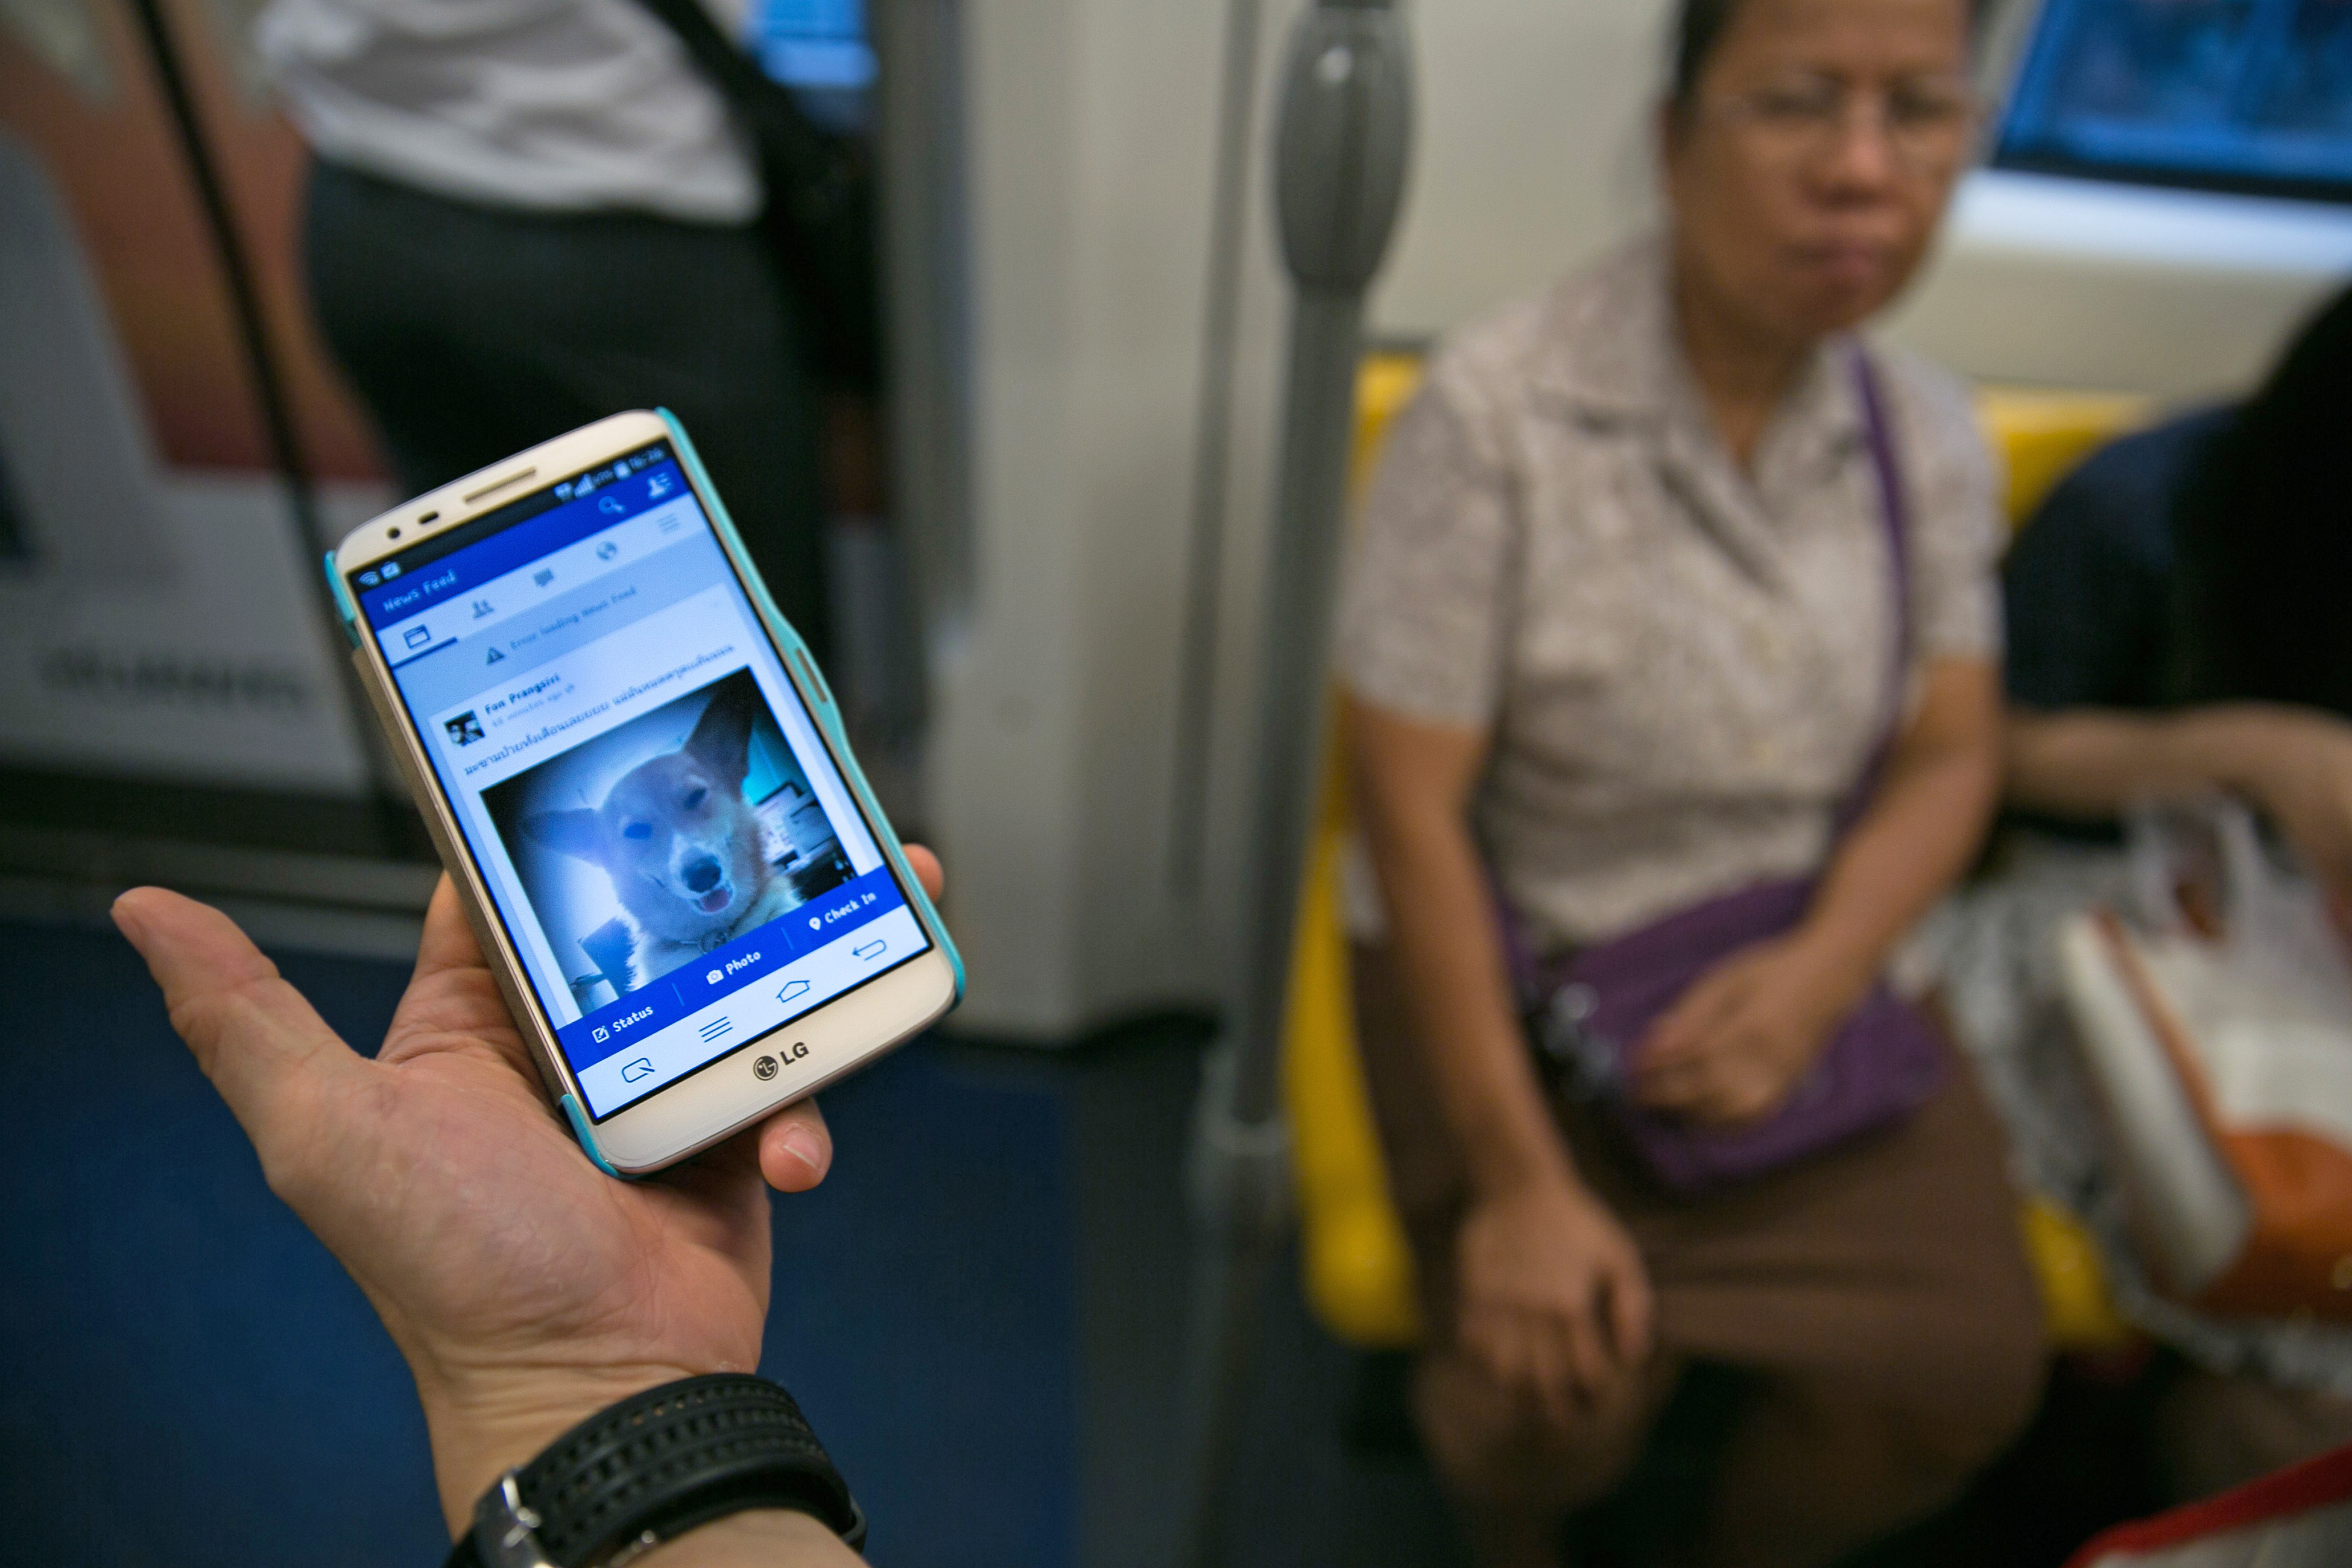 A man shows his mobile phone while riding the Bangkok sky train on May 28, 2014. A widespread Facebook outage occurred in Thailand one afternoon while the ruling military junta who staged a coup denied causing it. (Paula Bronstein—Getty Images)